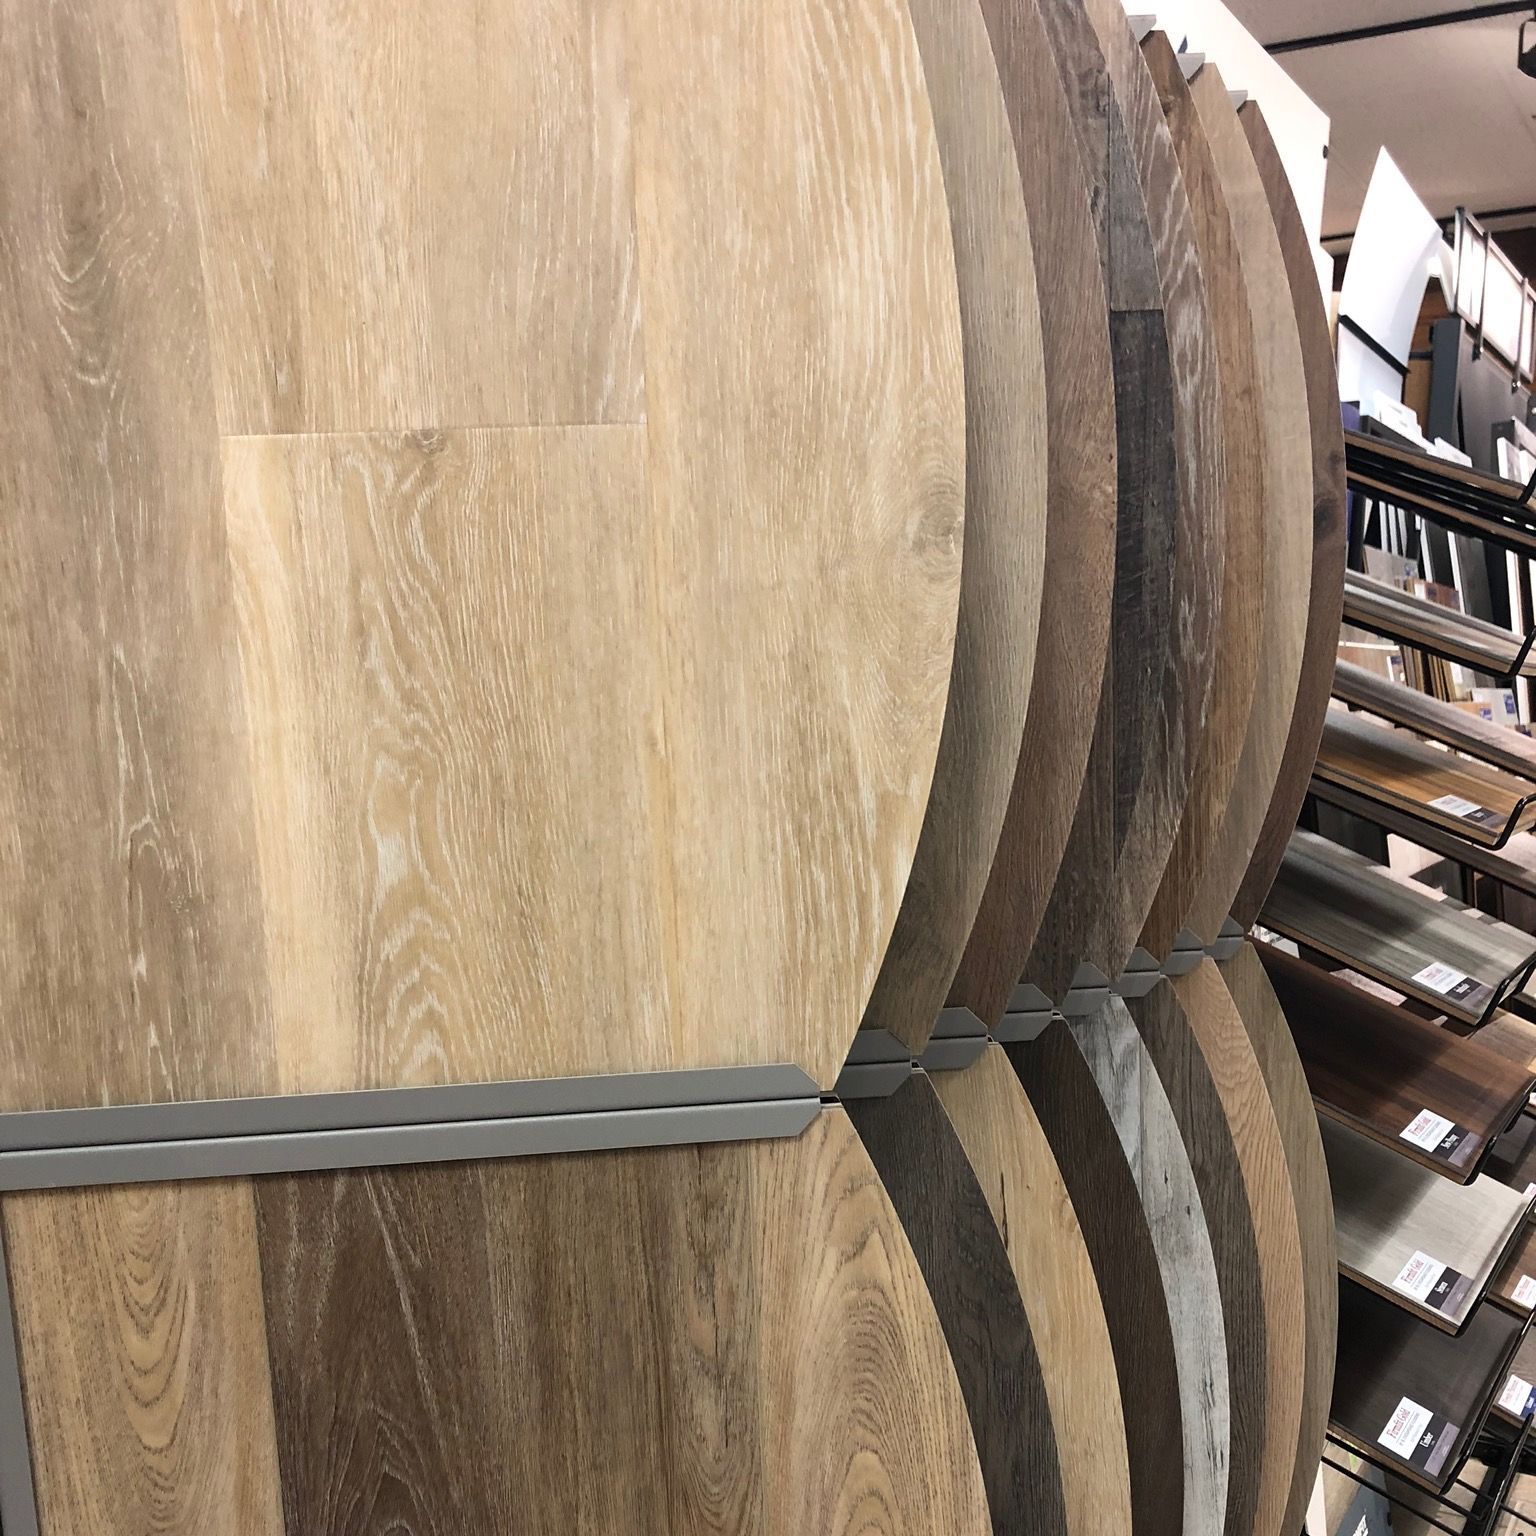 A row of wooden barrels are stacked on top of each other in a store.